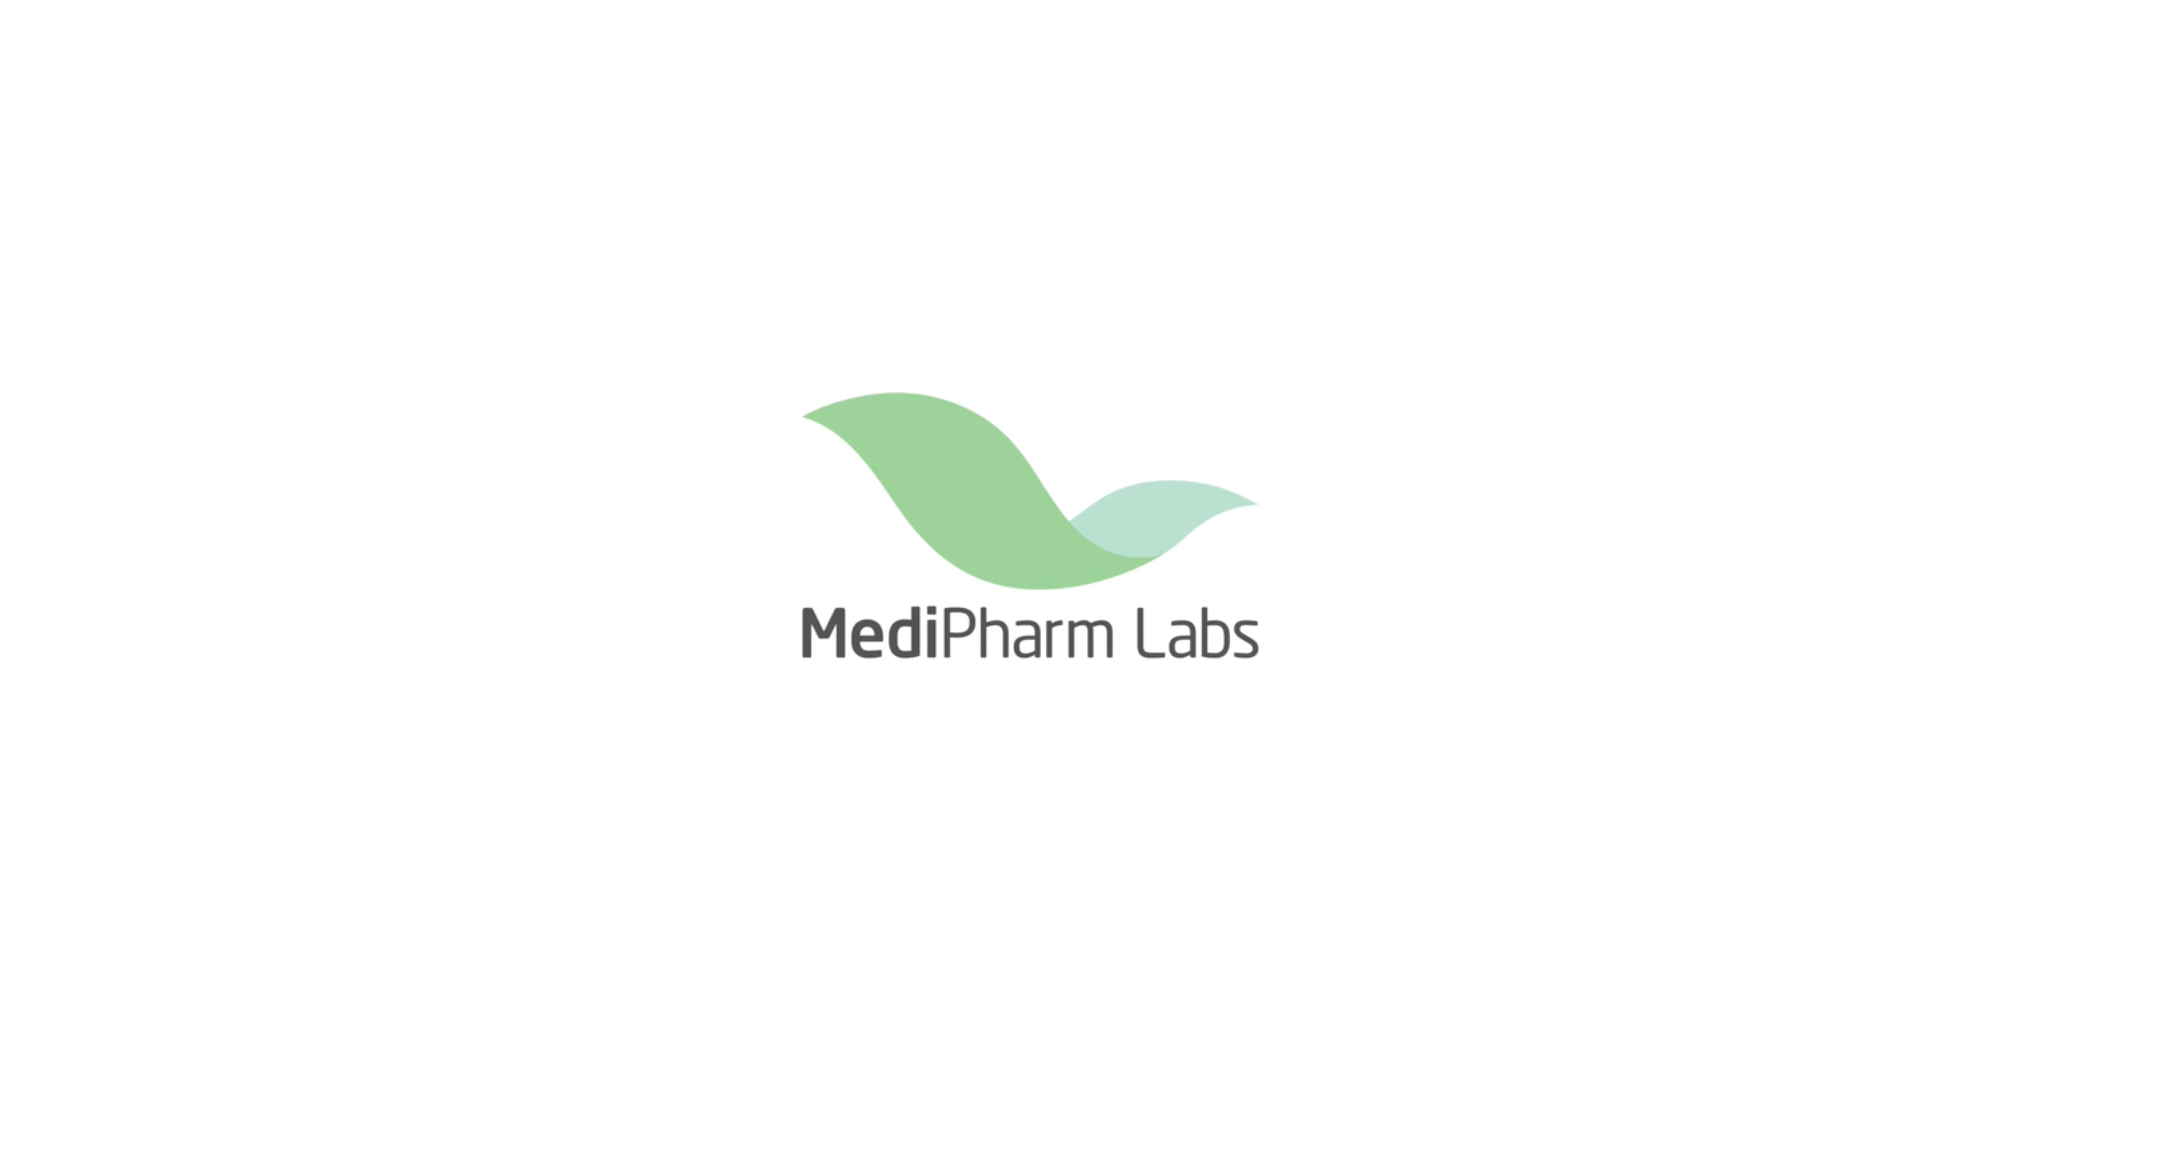 MediPharm Labs Expands In Brazil Via Supply Deal With XLR8